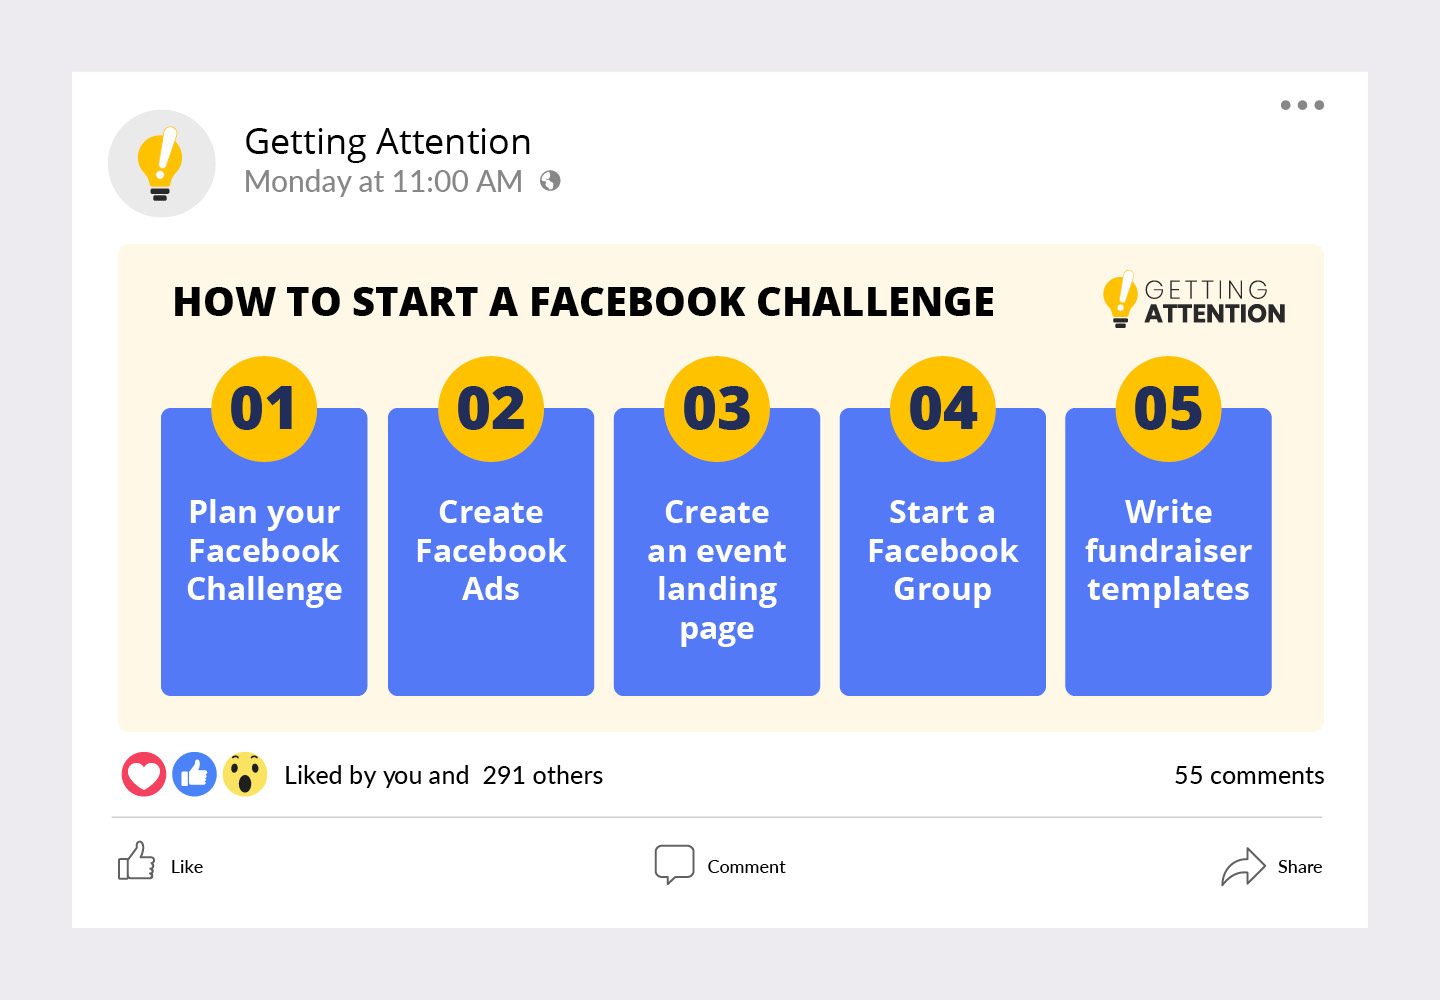 This graphic shows the five steps nonprofits must follow to start a Facebook Challenge, also covered in the text below.